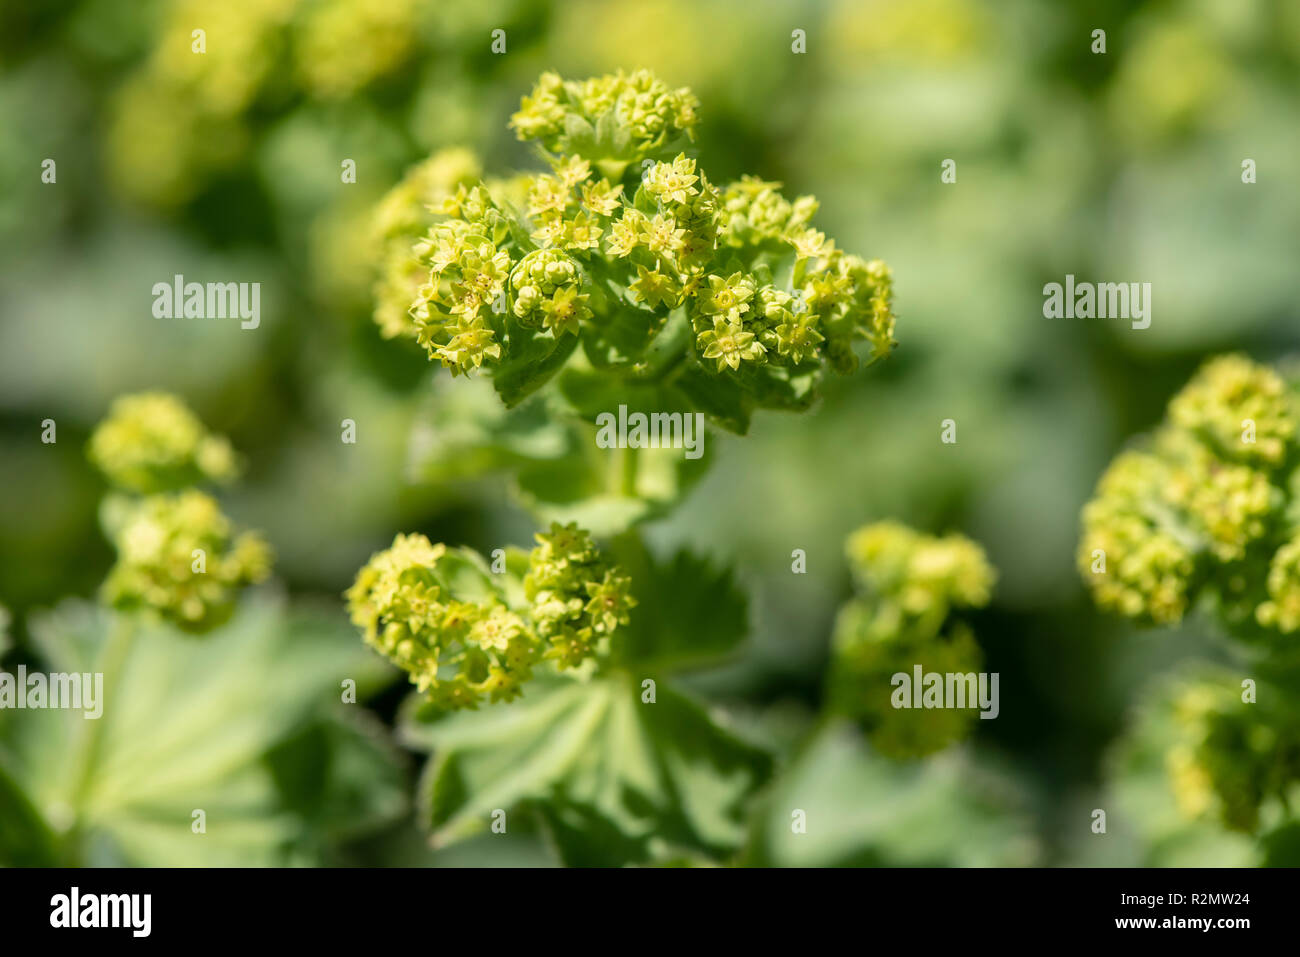 Lady's mantle as a medicinal plant for natural medicine and herbal medicine Stock Photo